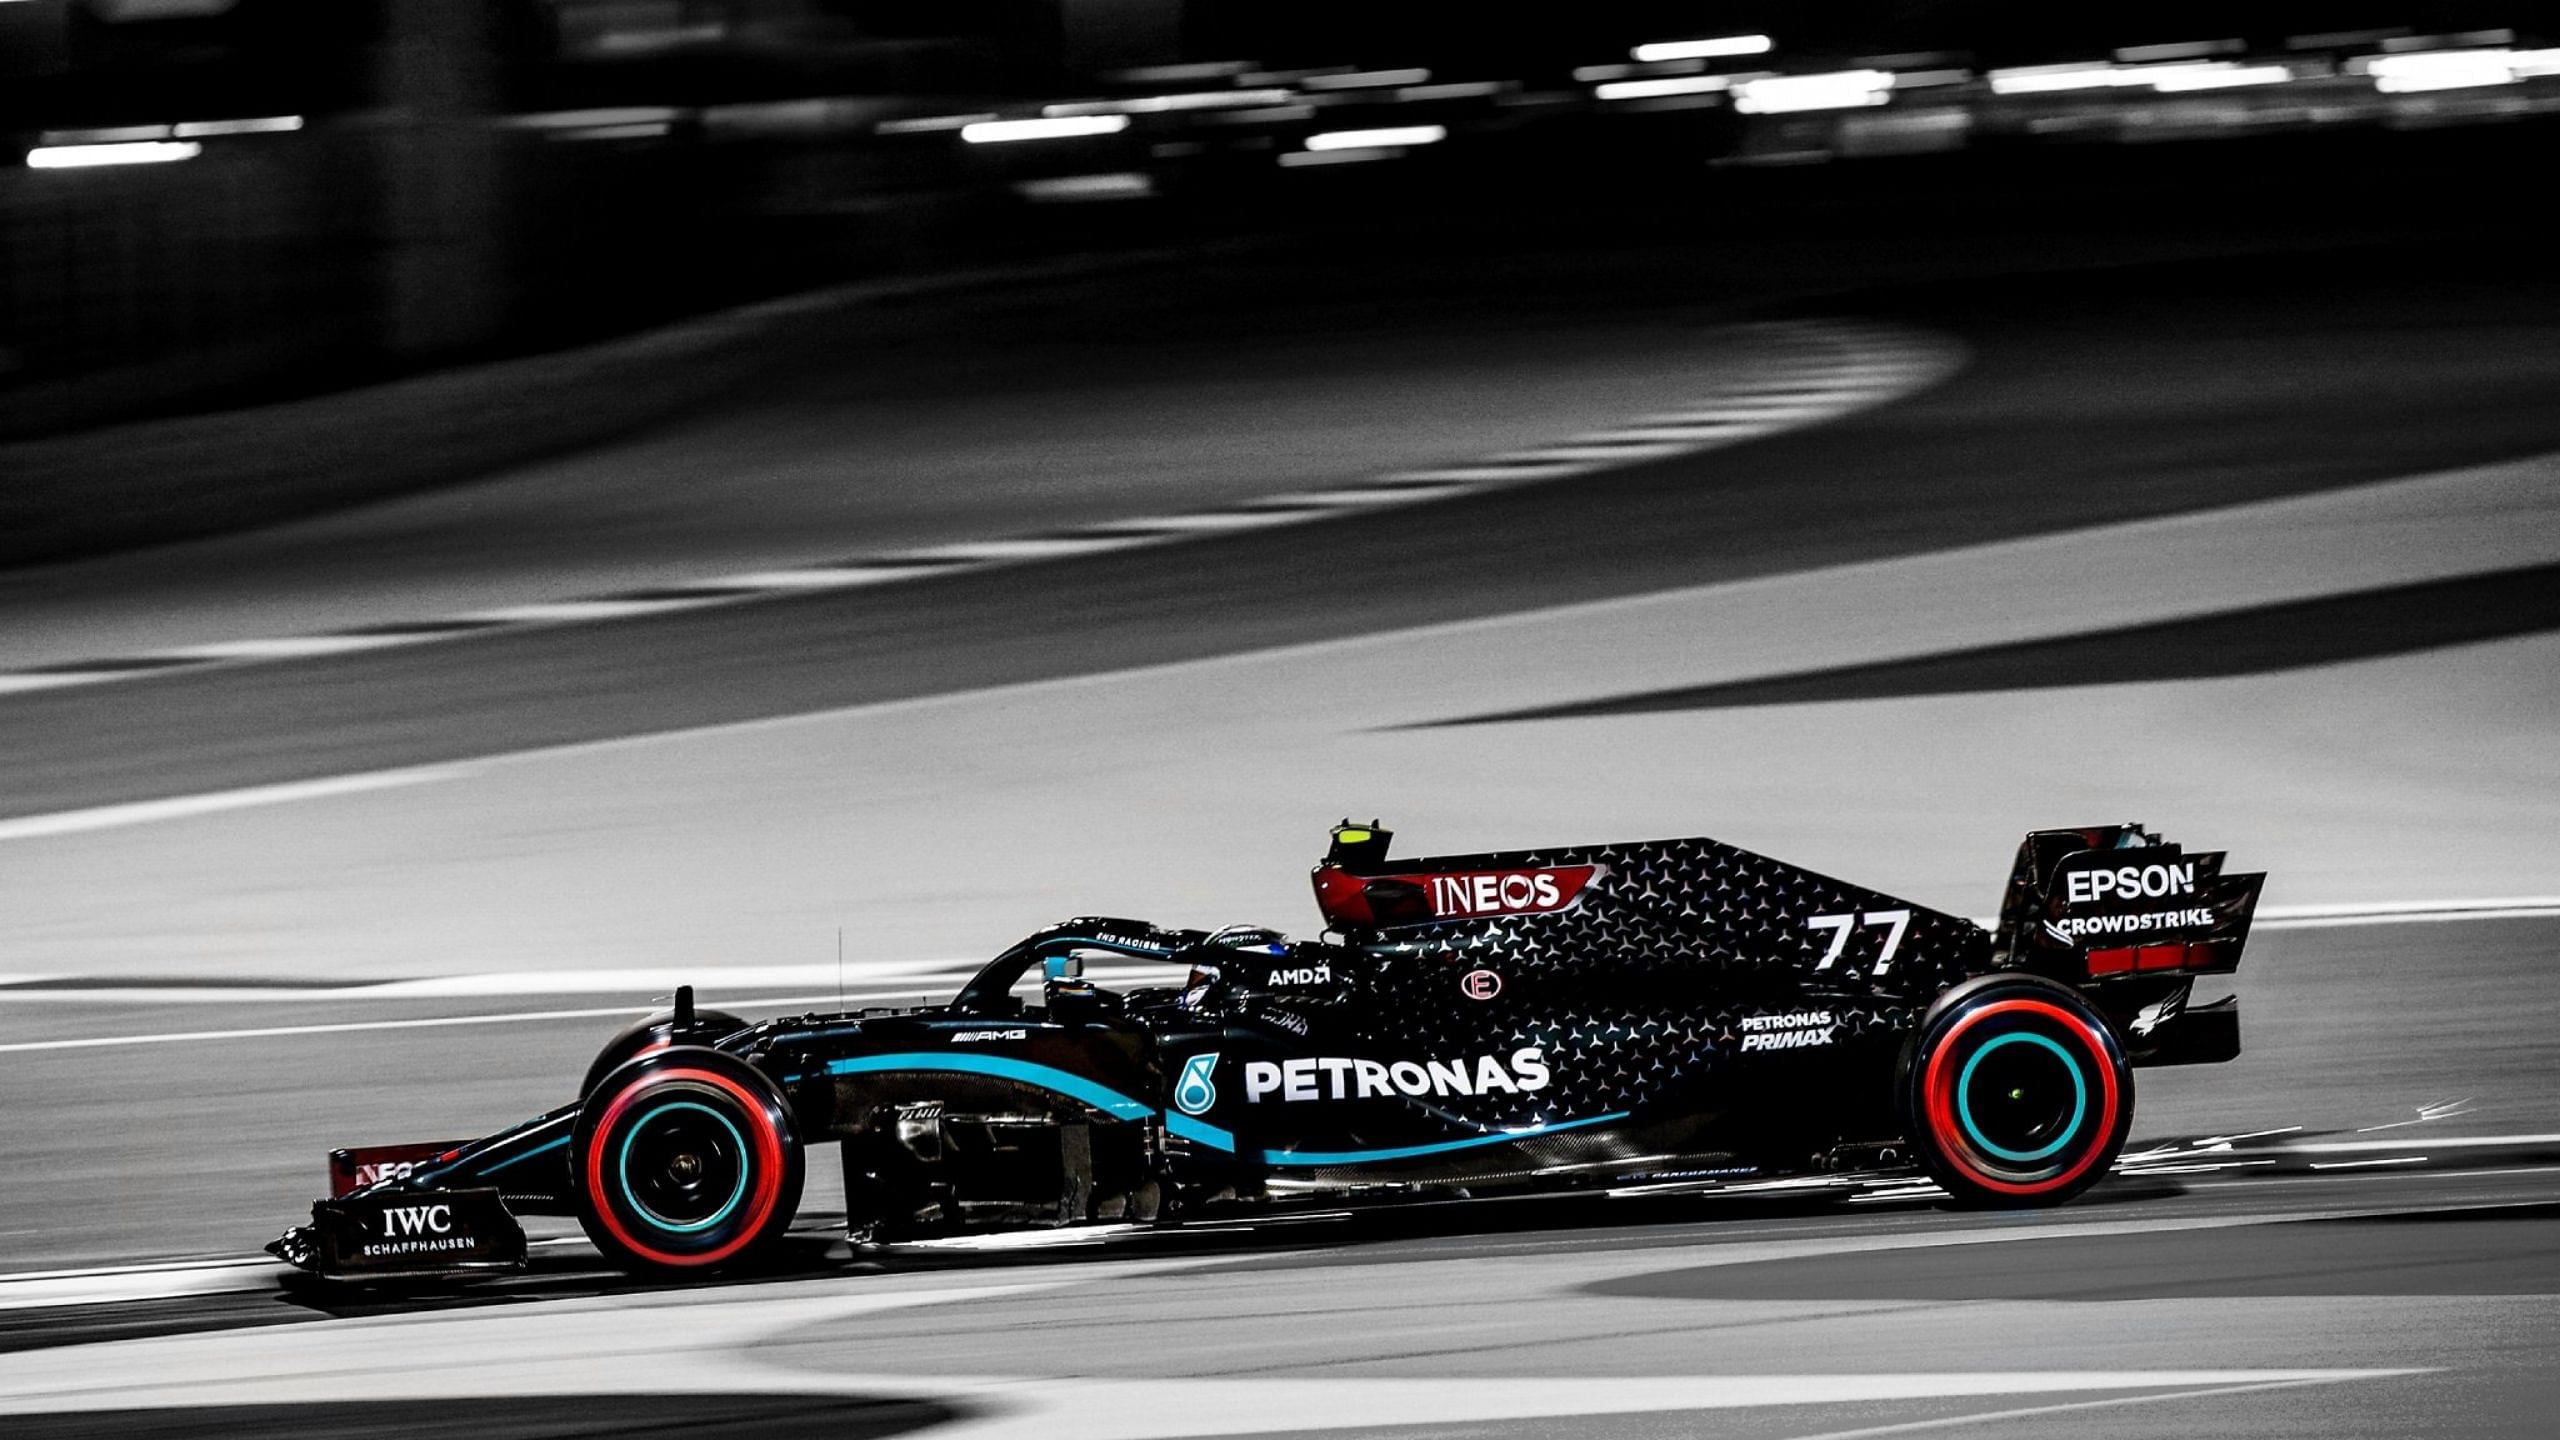 “We have a very special surprise this weekend in Abu Dhabi GP for our team members” - Mercedes F1 to run a special livery featuring names of all team members in season finale